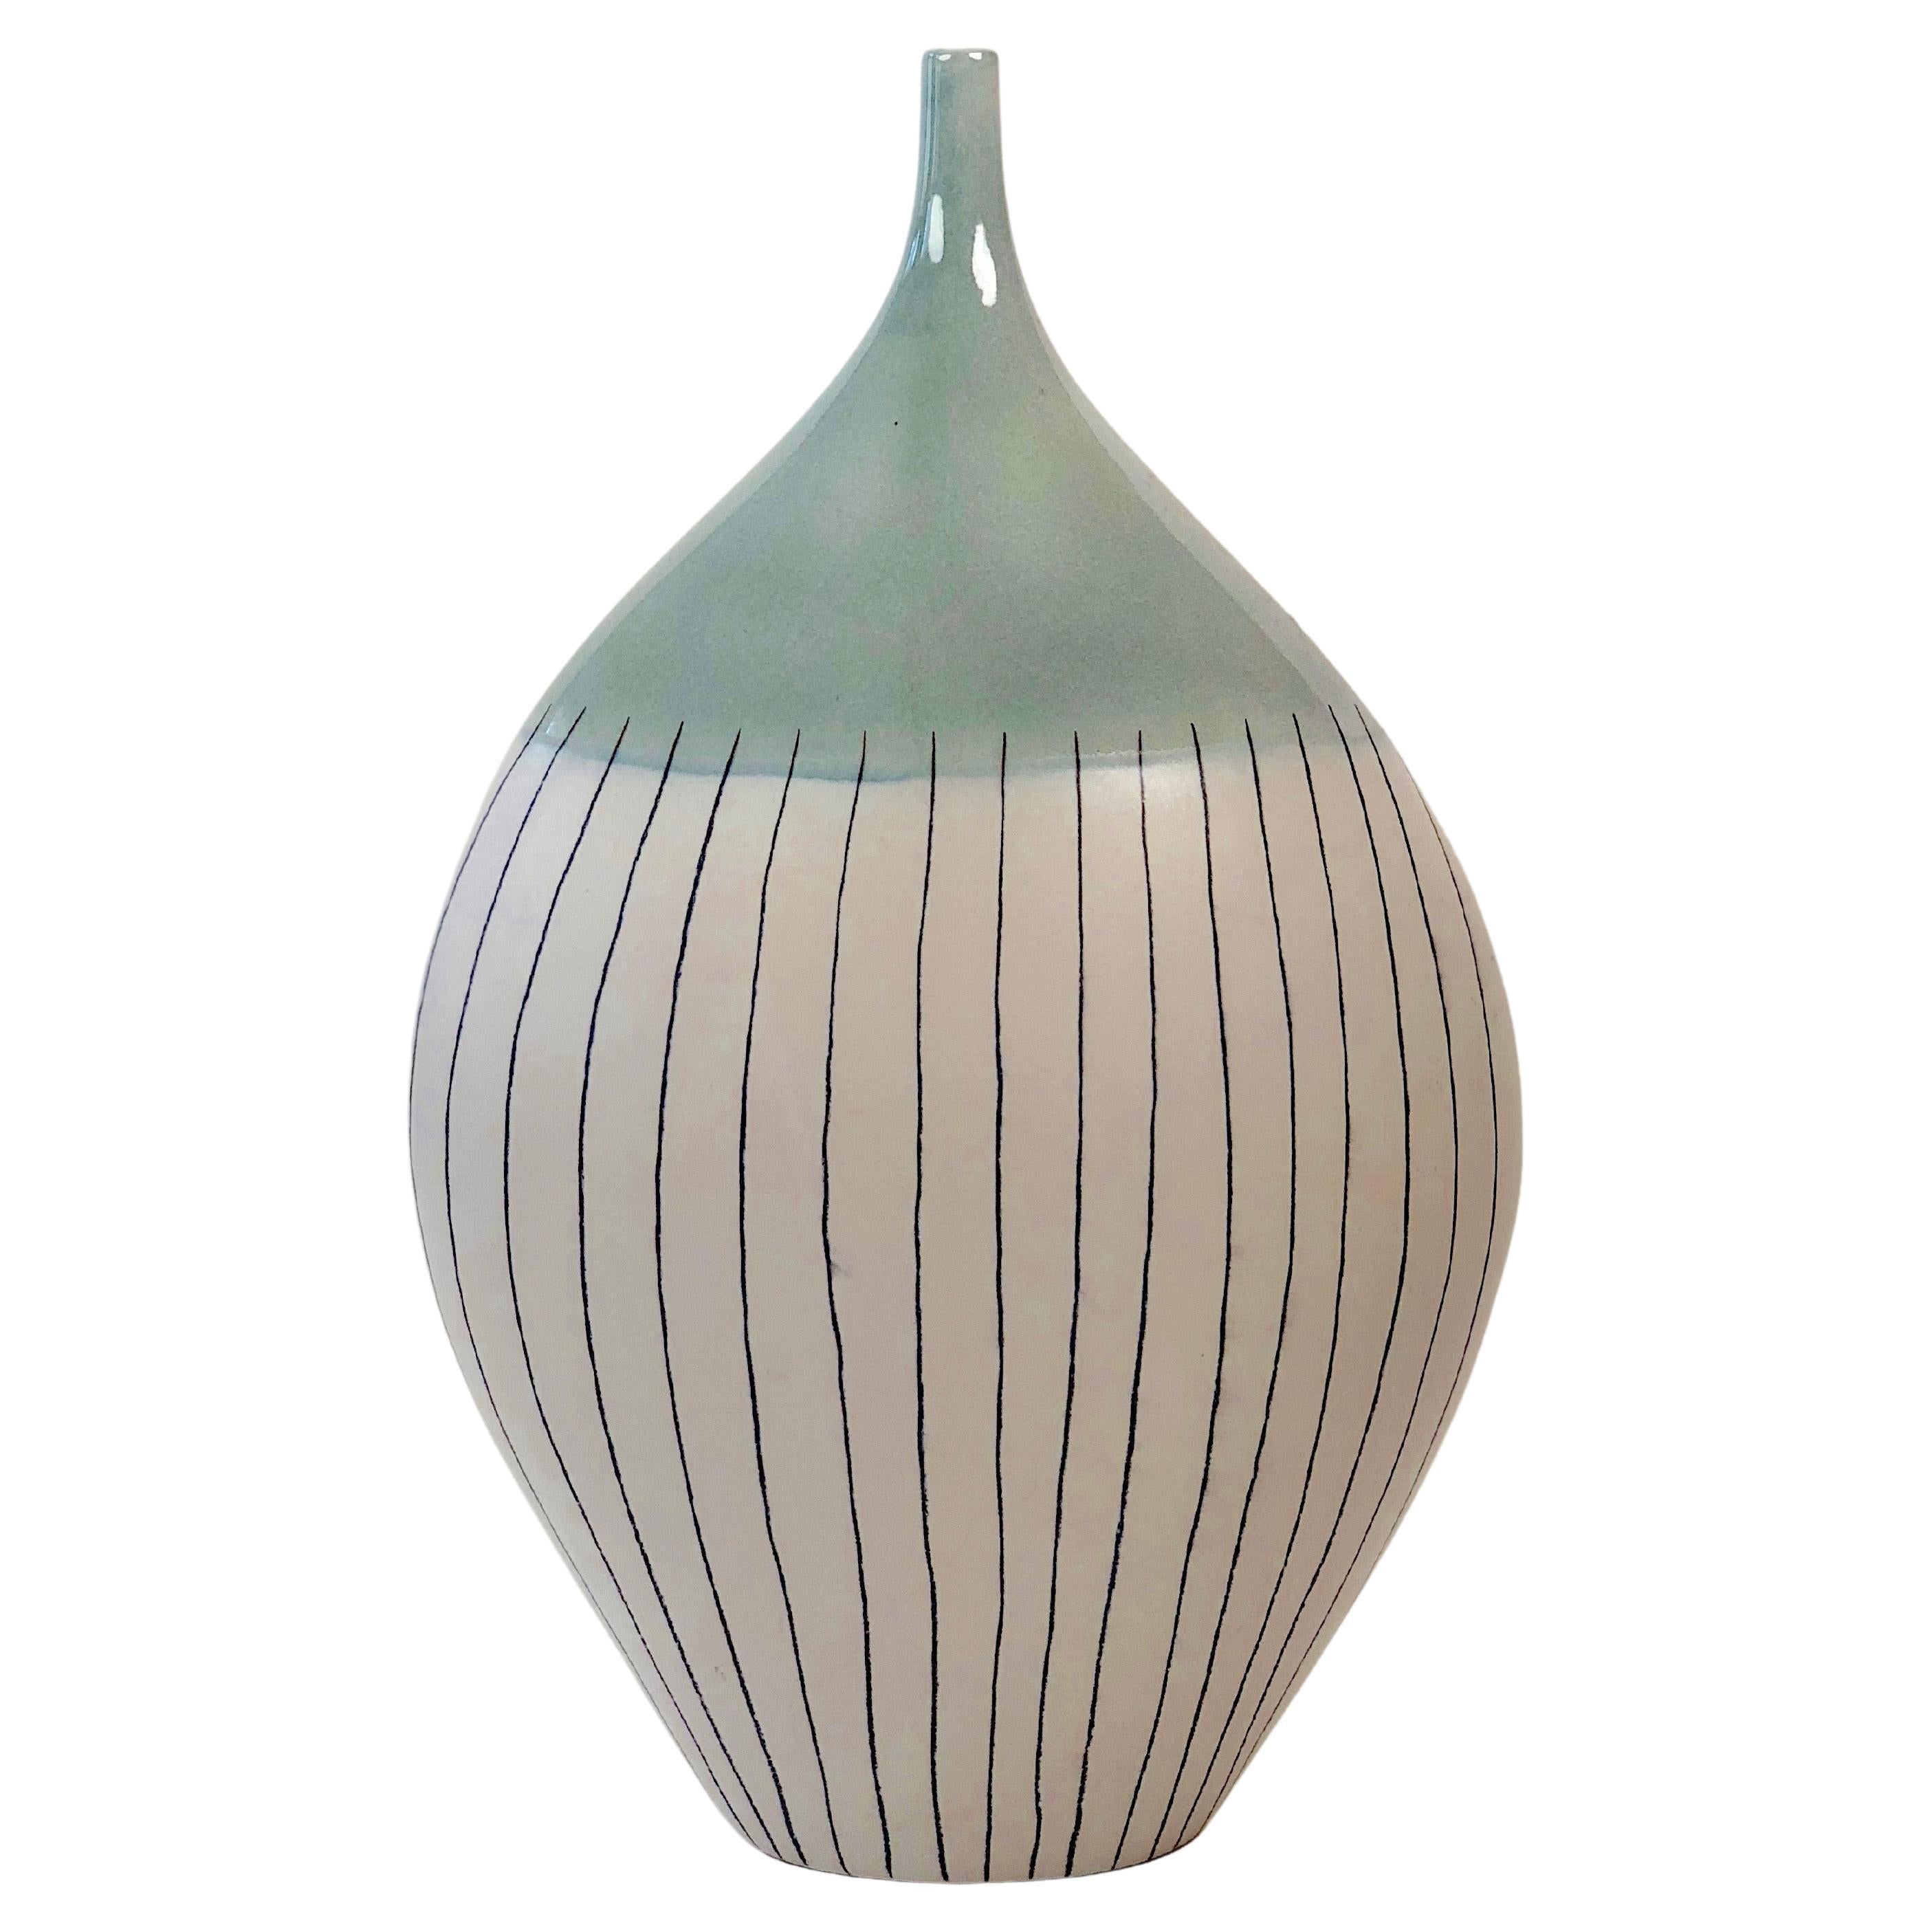 Large Ceramic Vase in a Minimalistic Style of the 60's